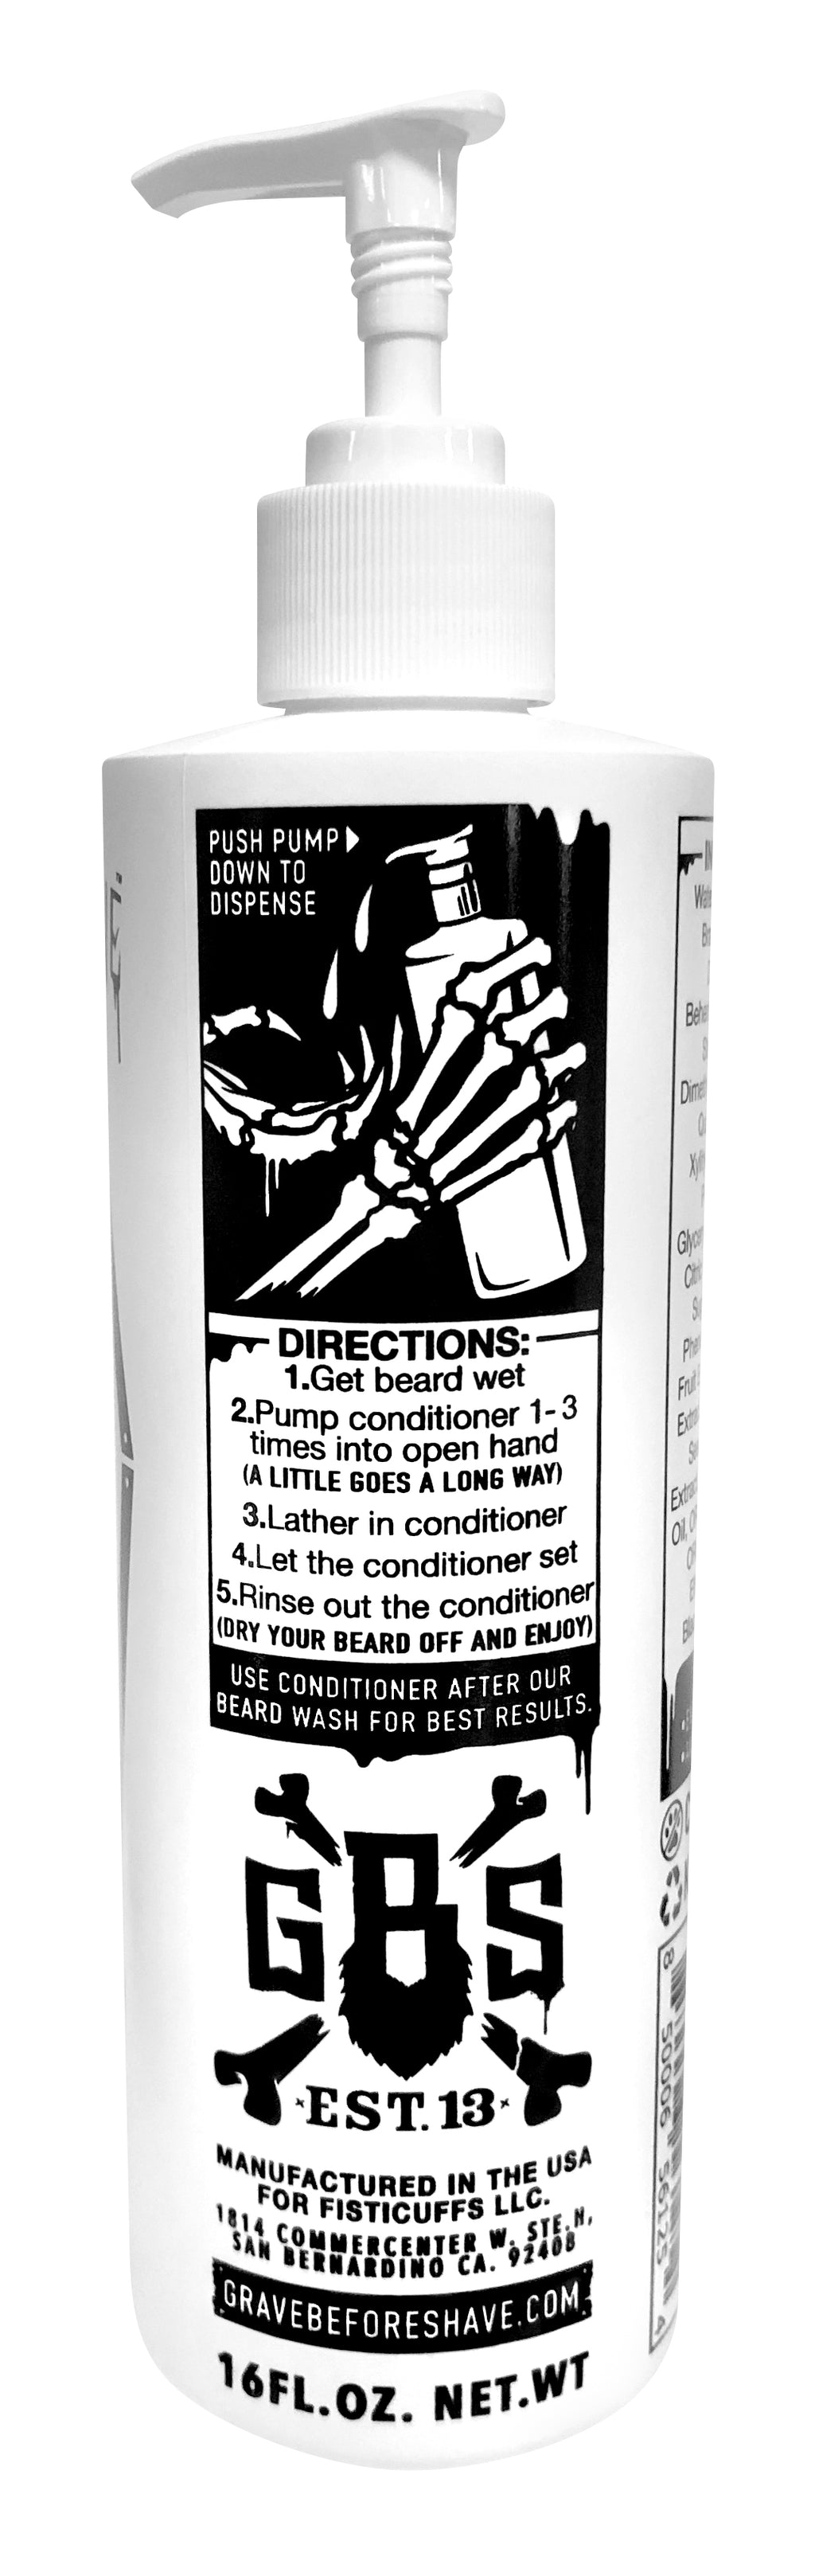 GRAVE BEFORE SHAVE BEARD CONDITIONER